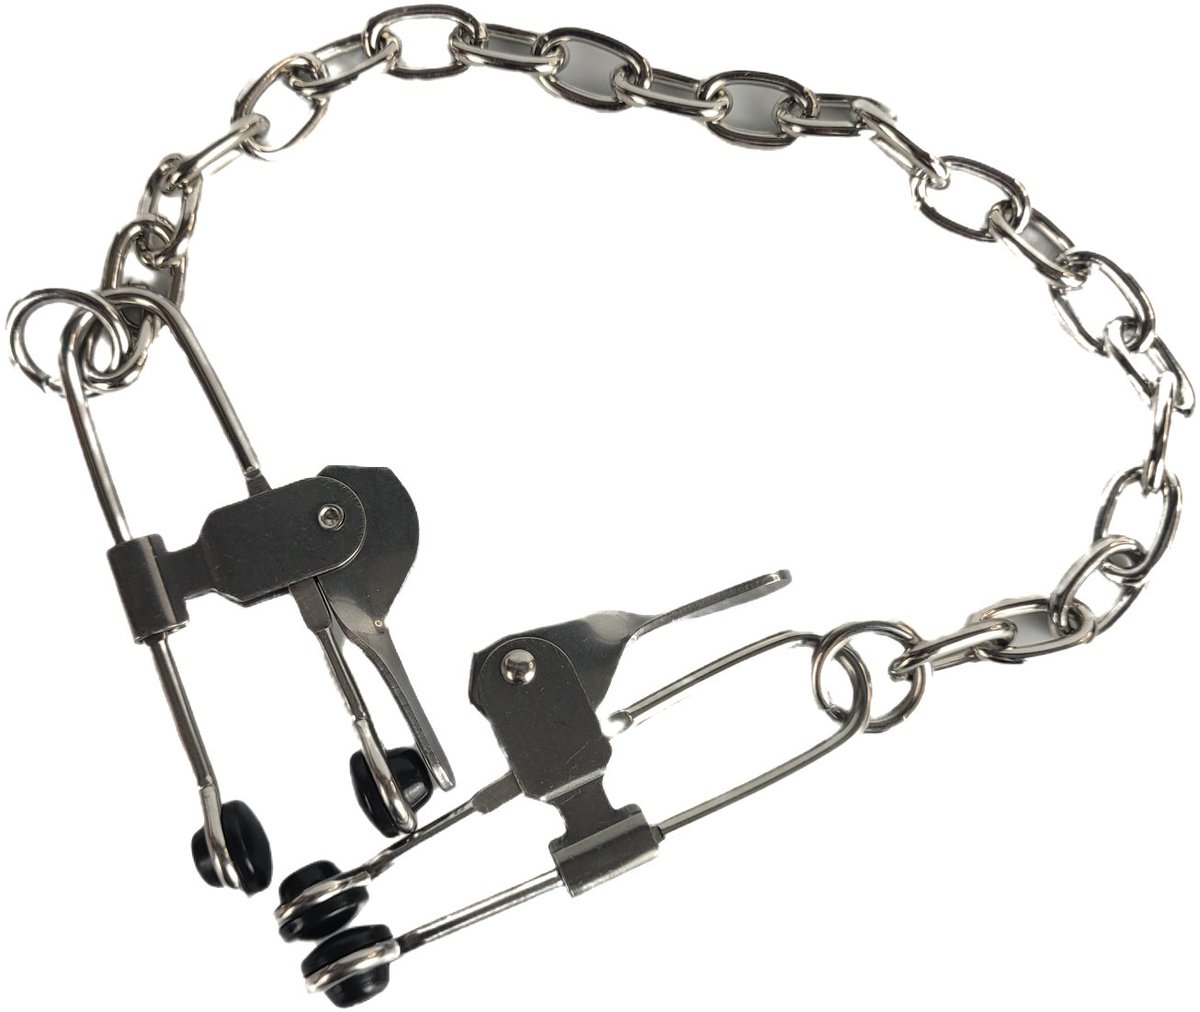 Nipple clamp available allaboutgag.com/products/large…